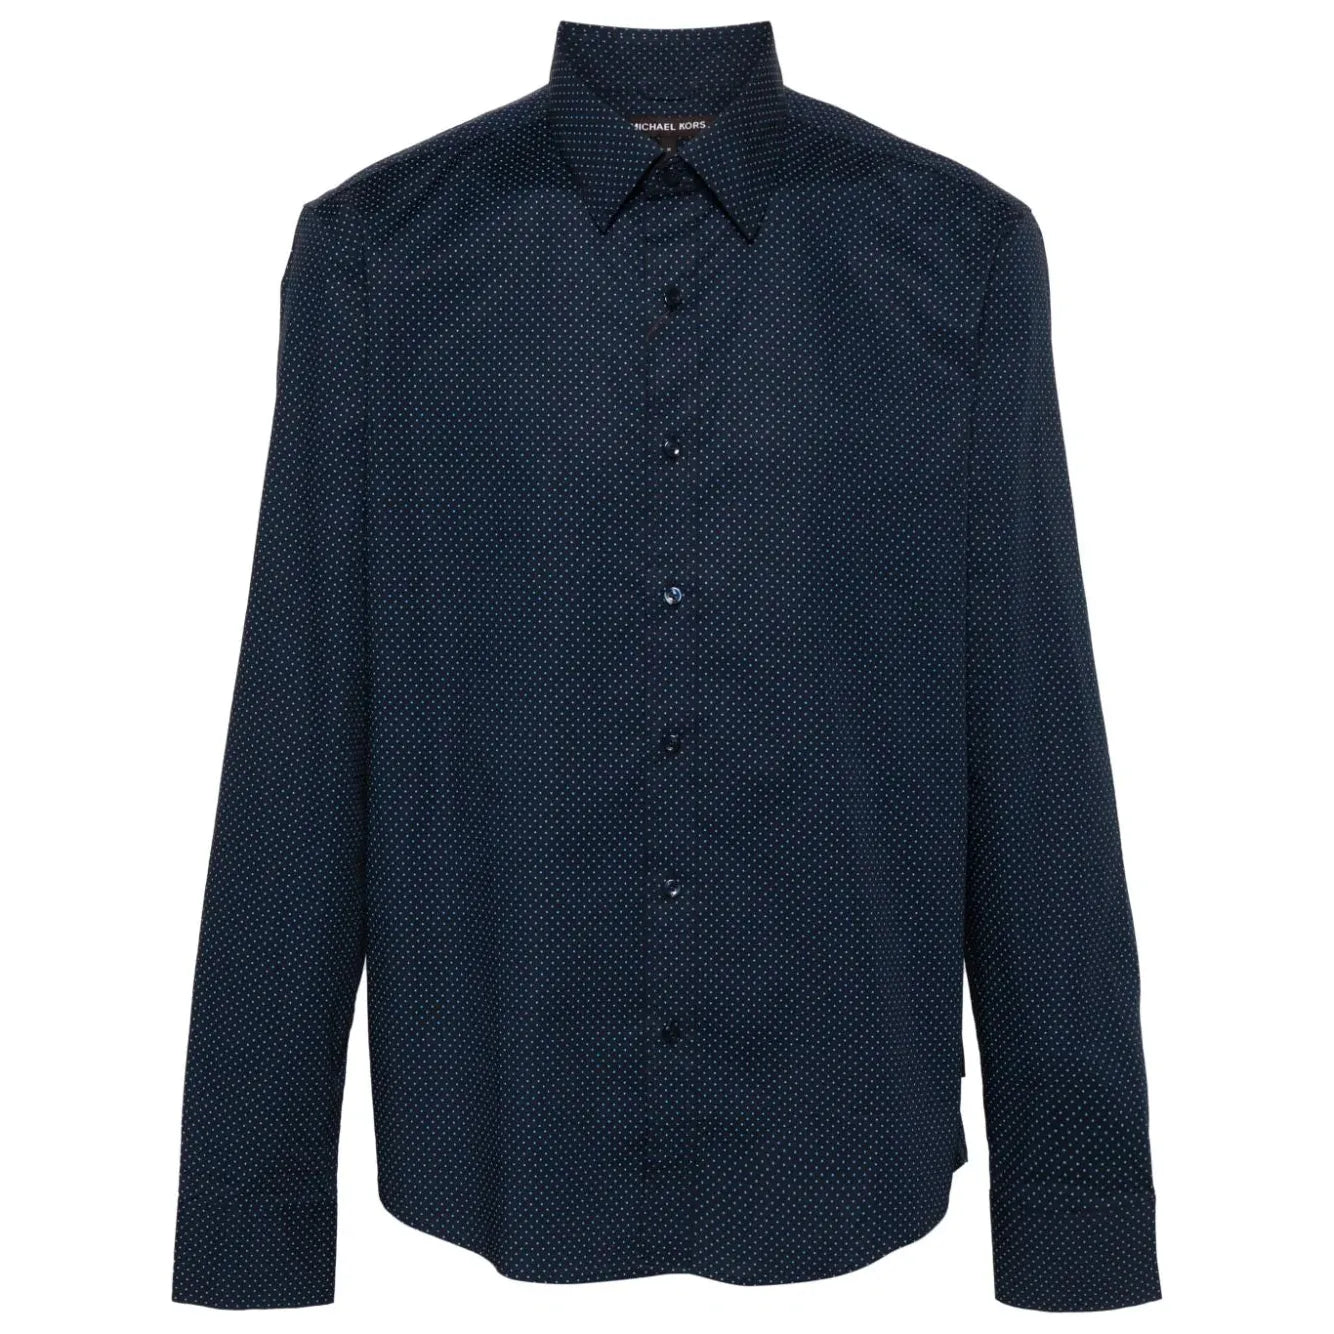 Micheal Kors - Long Slevve Button Up in Navy Dots